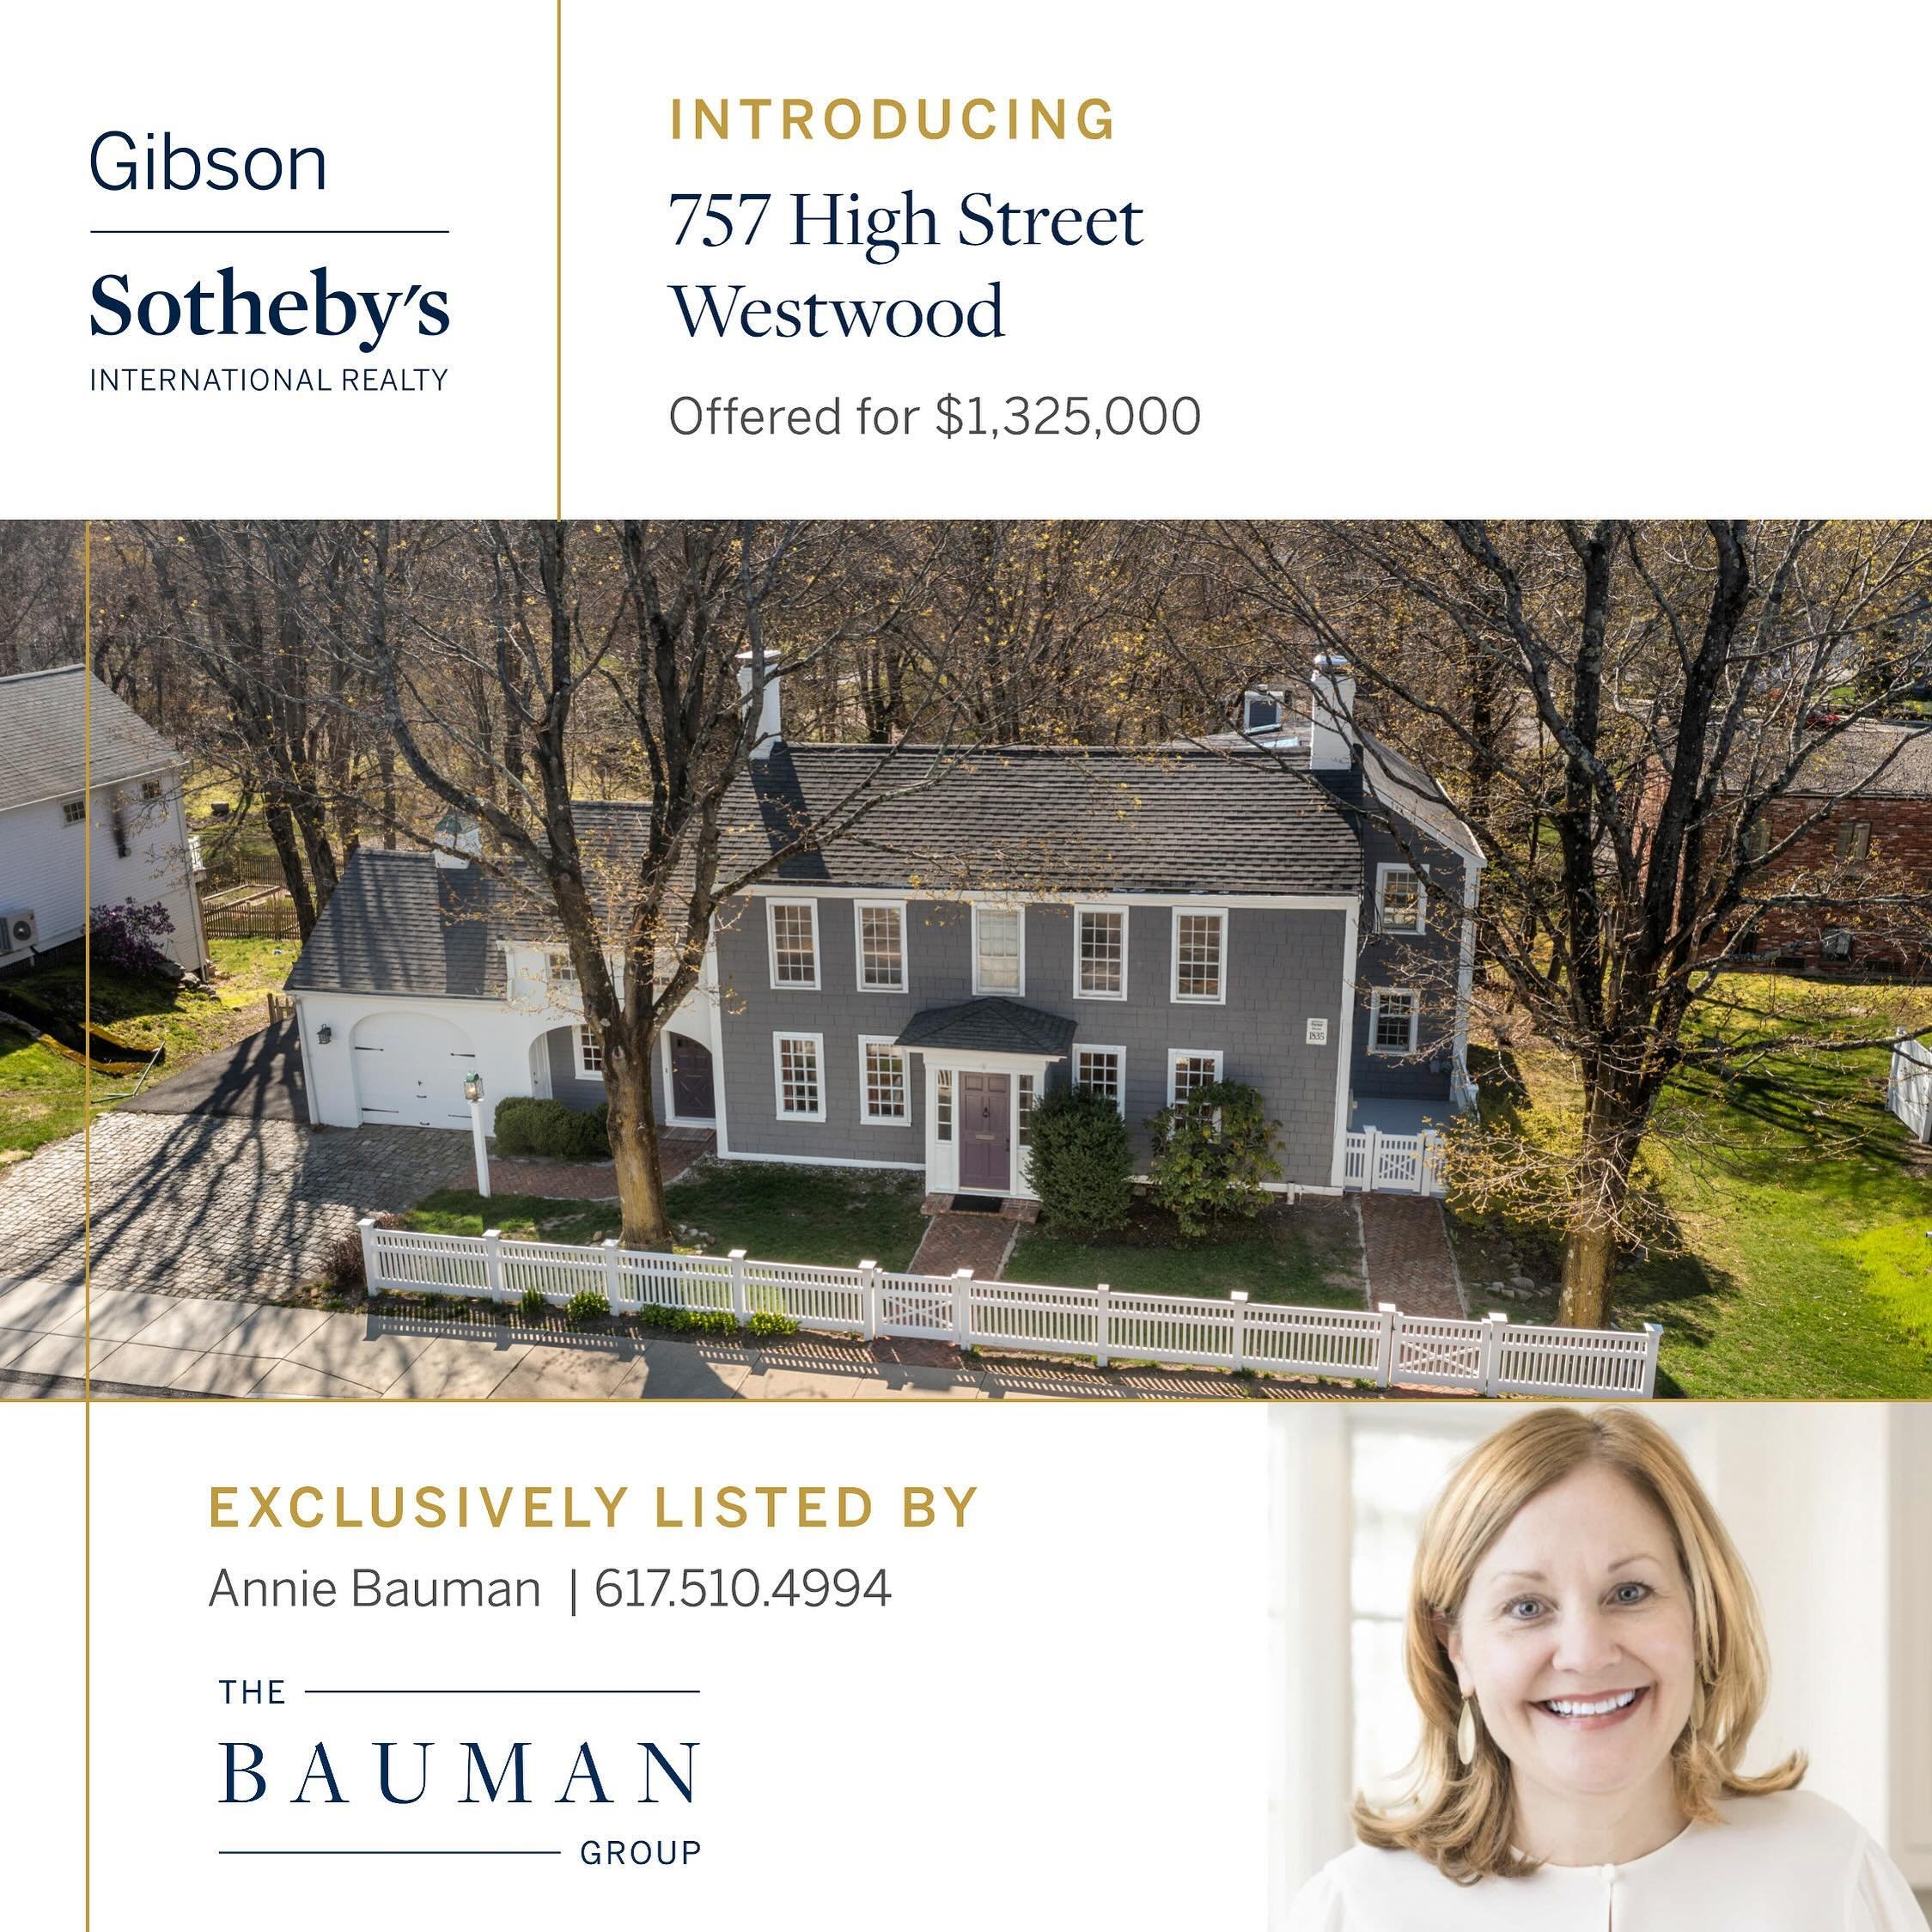 Psyched to launch 757 High Street Westwood. Character and charm define this beloved in-town gem. Richly renovated without compromising its architectural integrity, this home includes over 3000 square feet of living space on three levels. Join me this